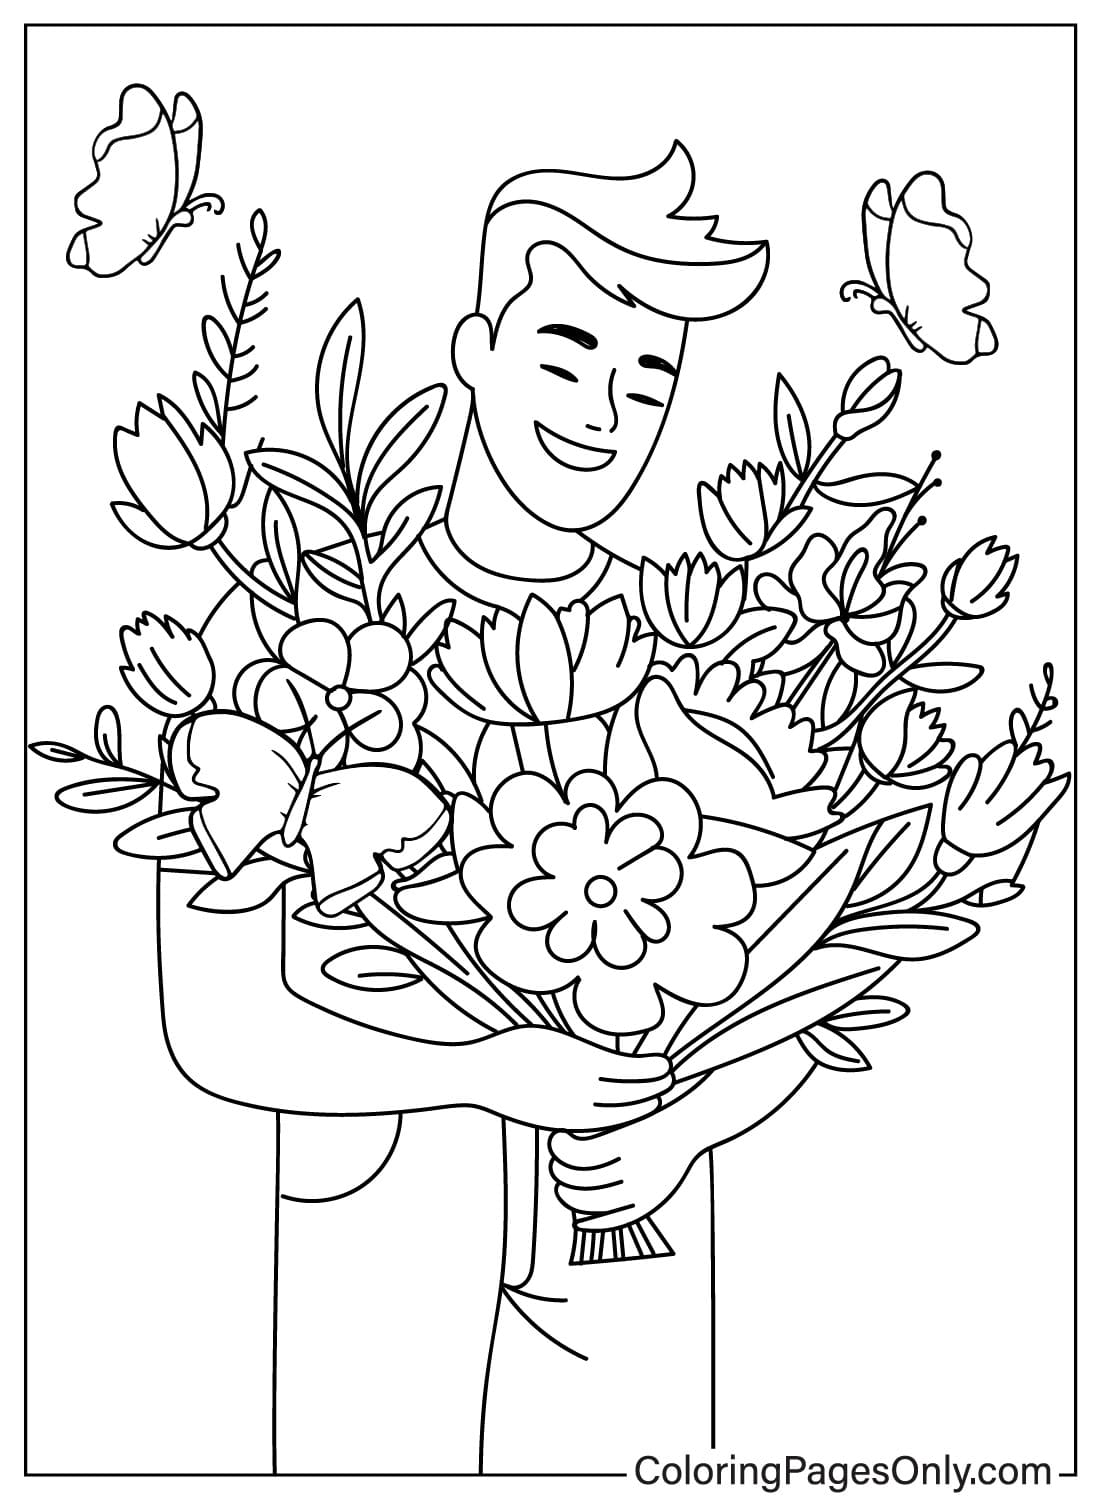 Boy with Flower Bouquet Coloring Page from Flower Bouquet